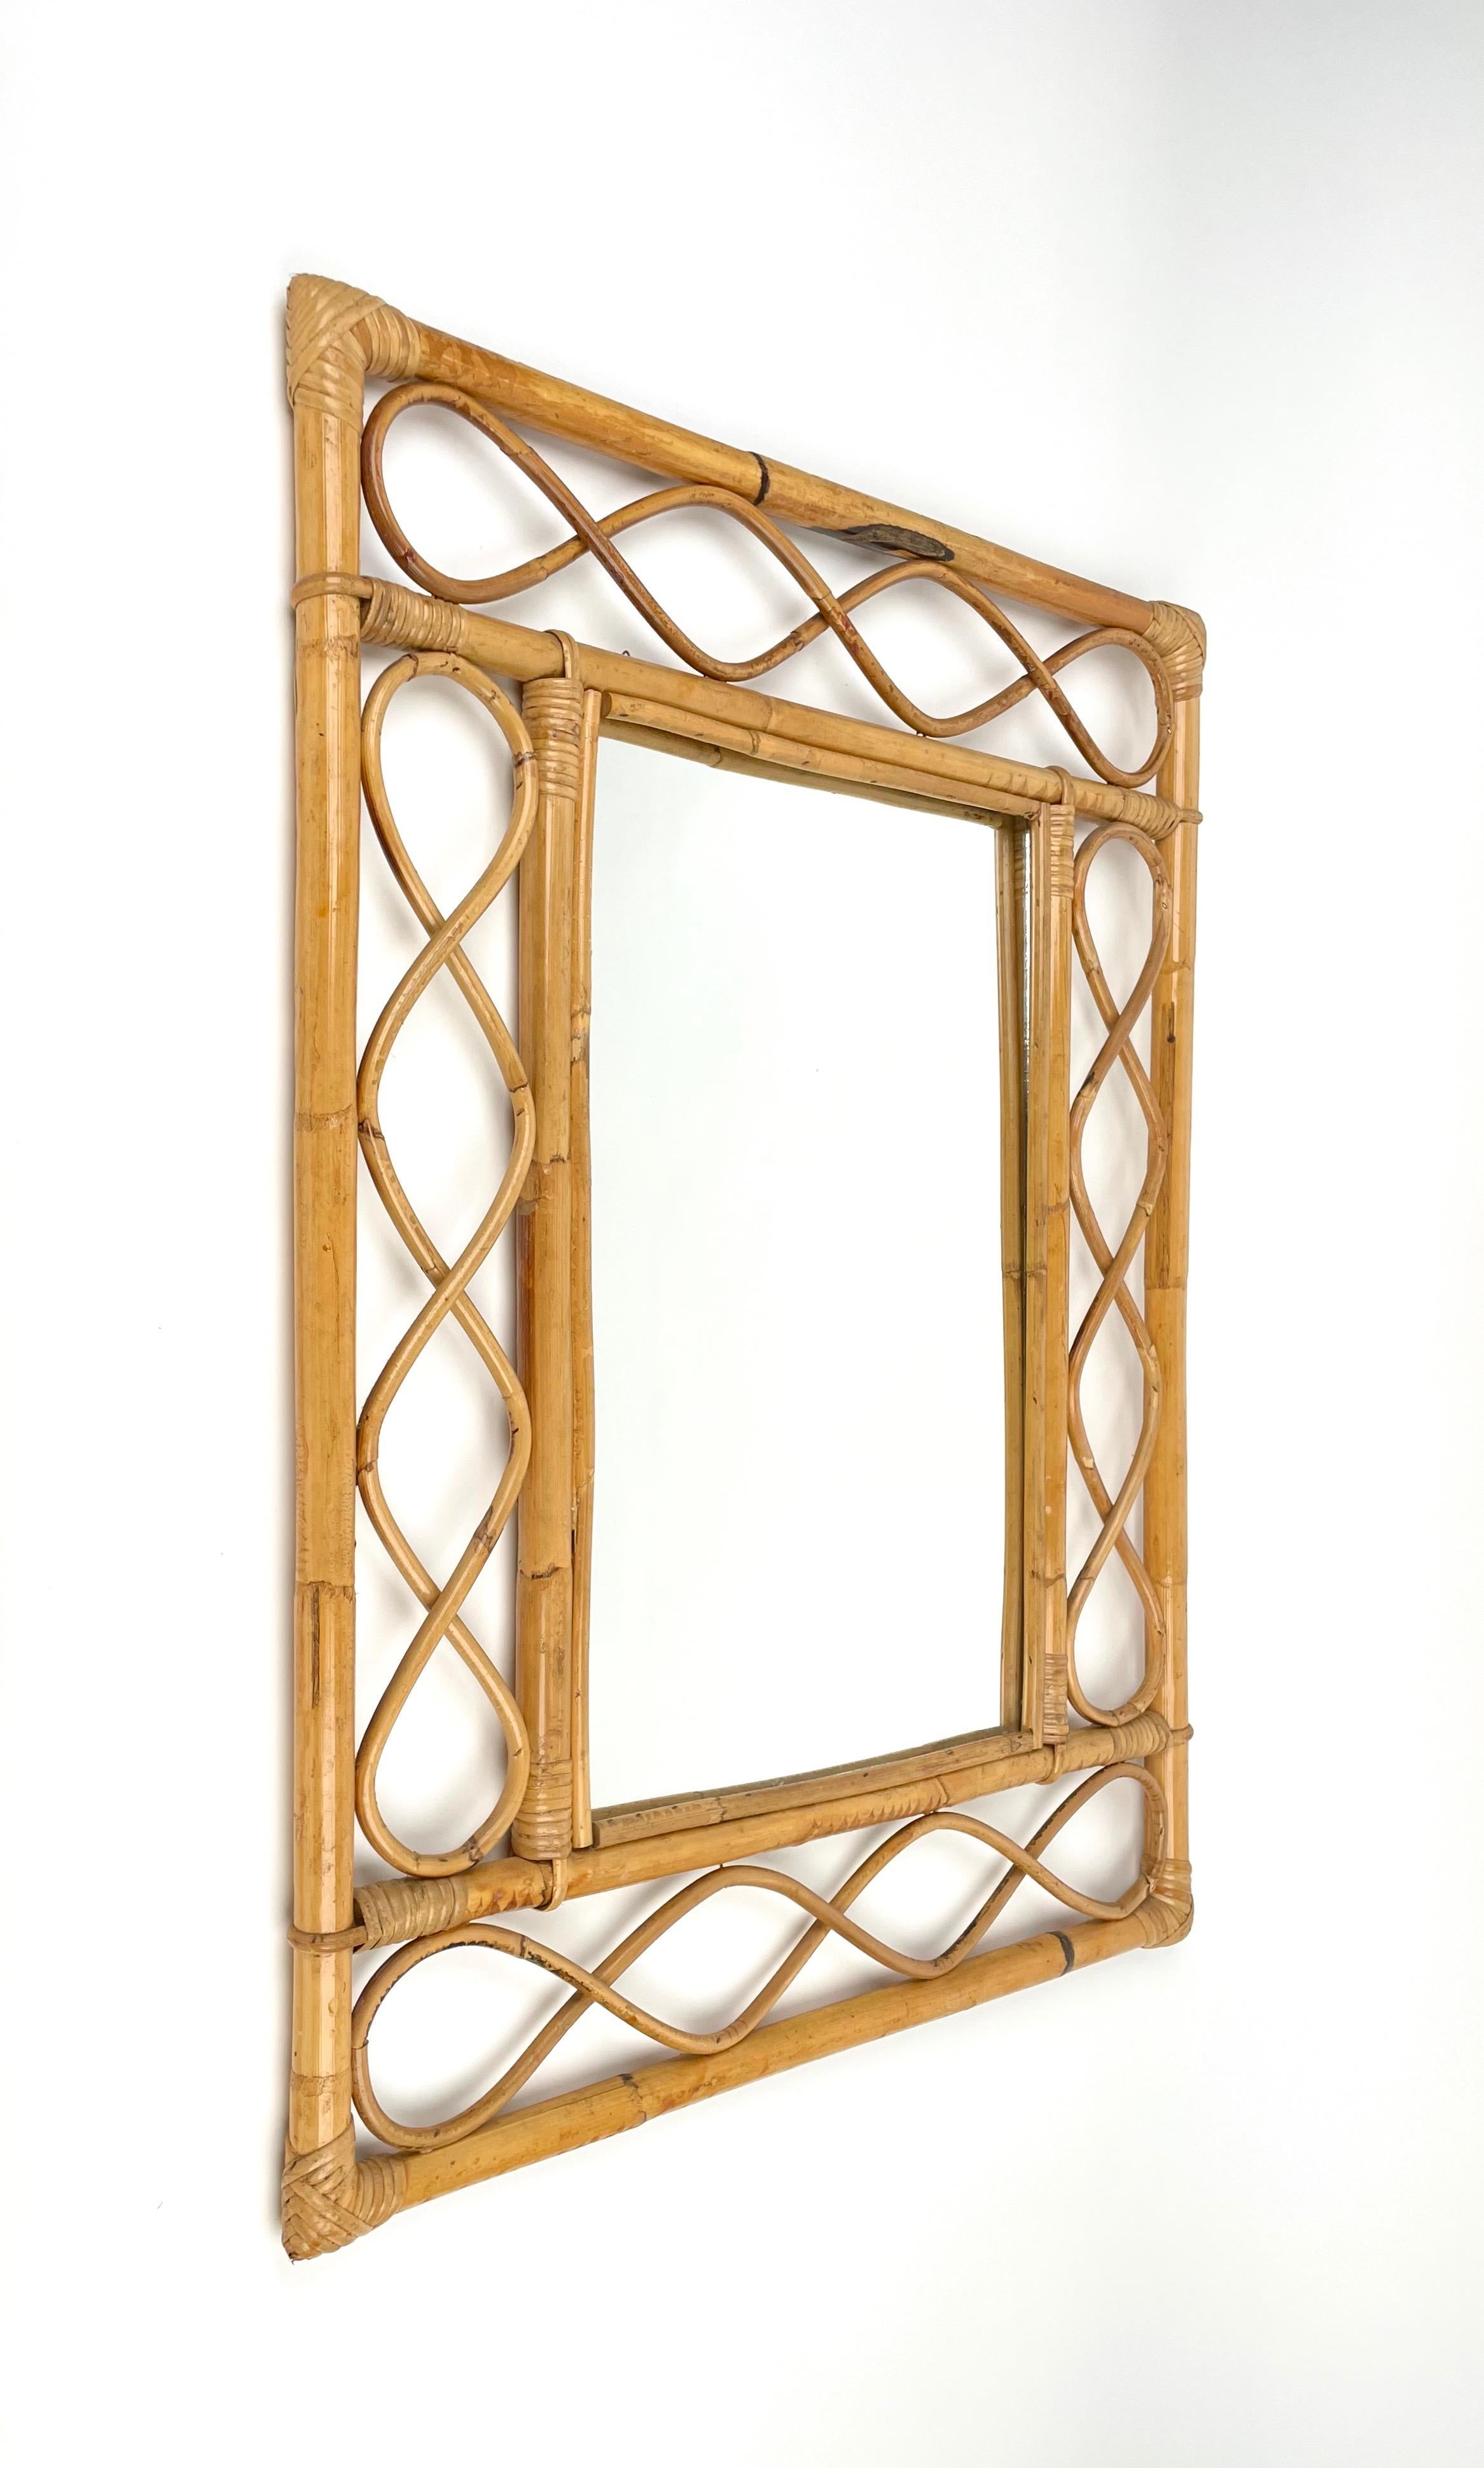 Marvellous Côte d'Azur wall mirror in bamboo and rattan. This item was produced in France during the central part of the 1960s.

The mirror its original and good vintage conditions, and the use of the materials and the lines, the straight bamboo